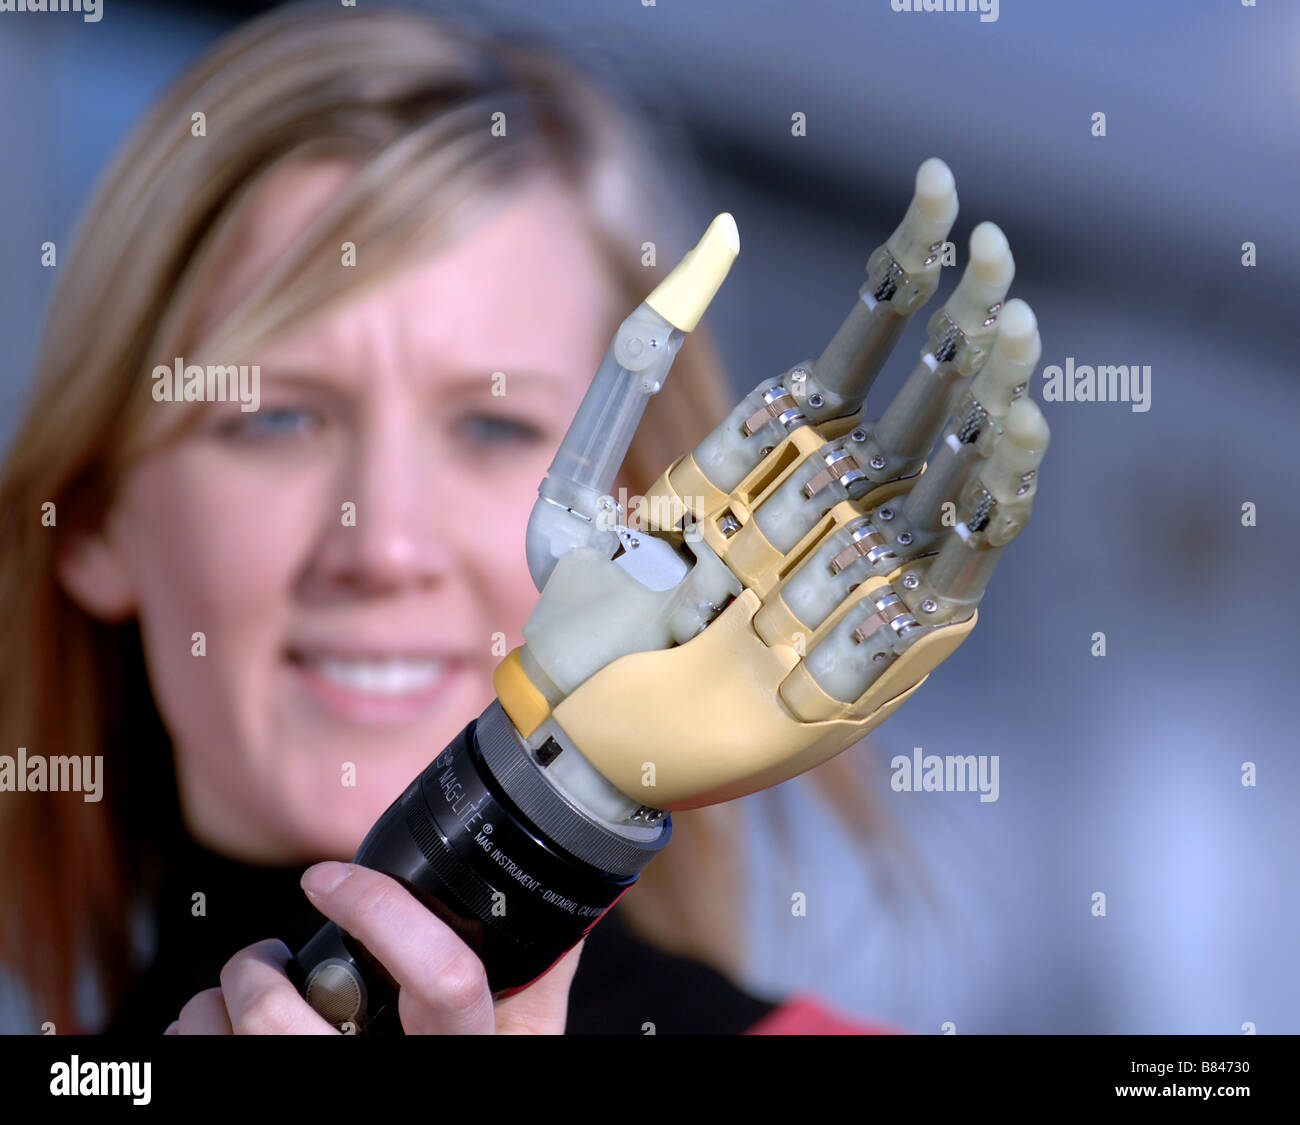 Bionic hands for amputees. Each digit can move. Stock Photo